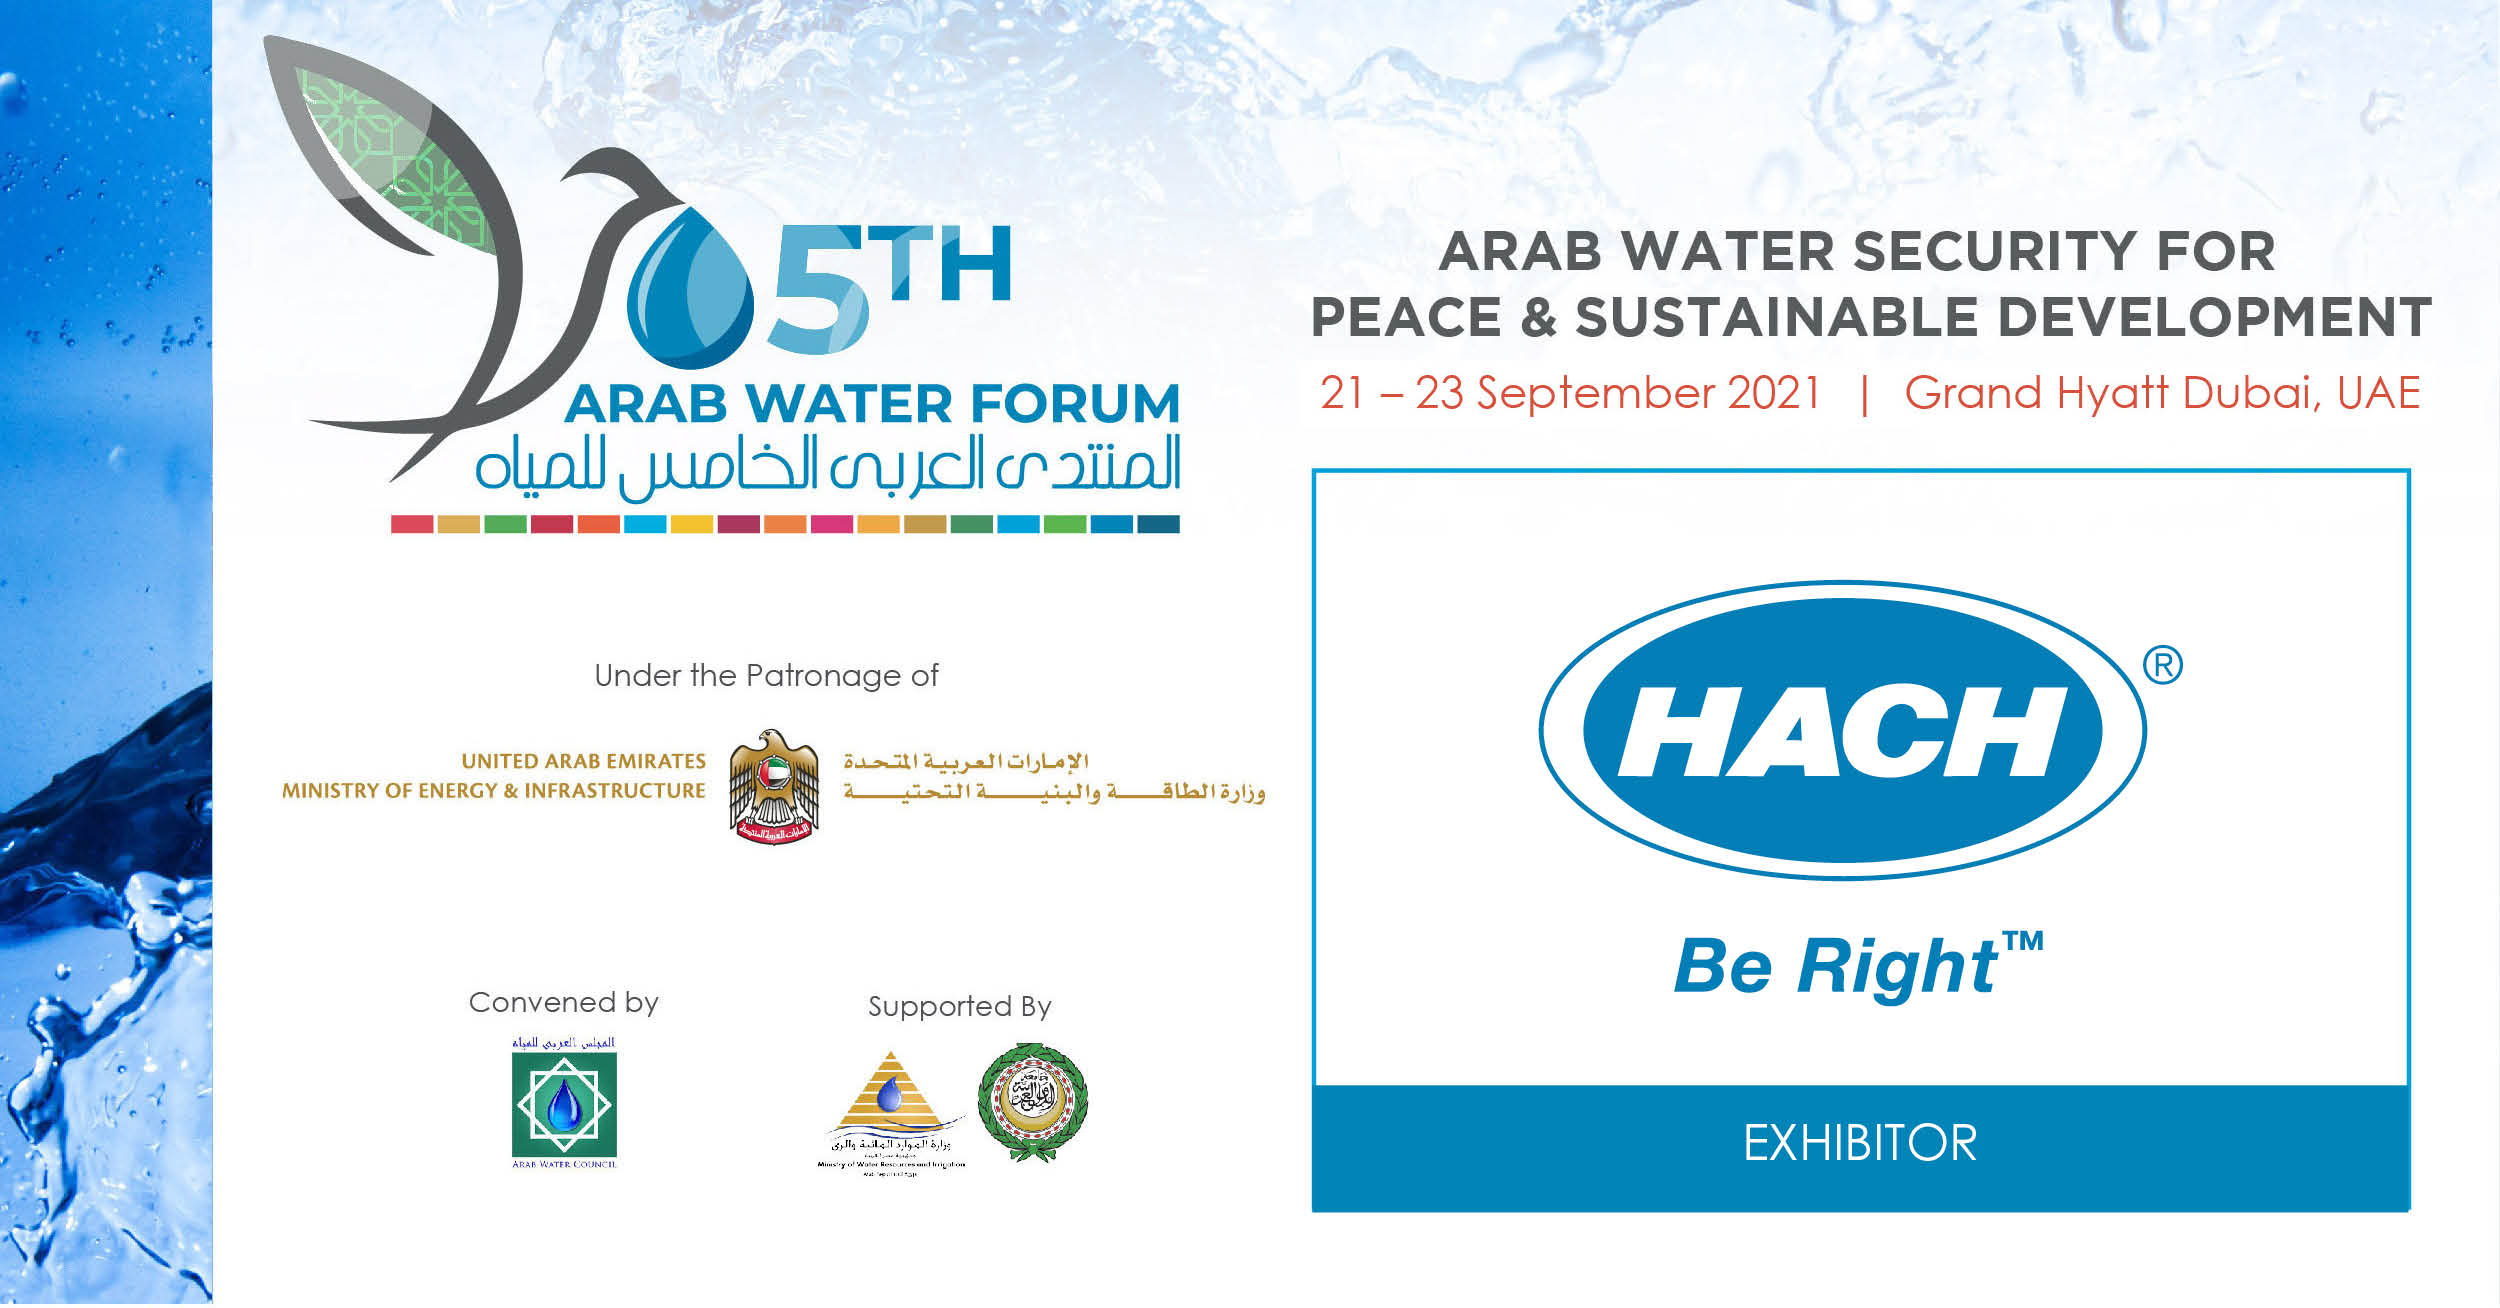 Hach will participate on the 5th Arab Water Forum from 21 – 23 September 2021 in Dubai